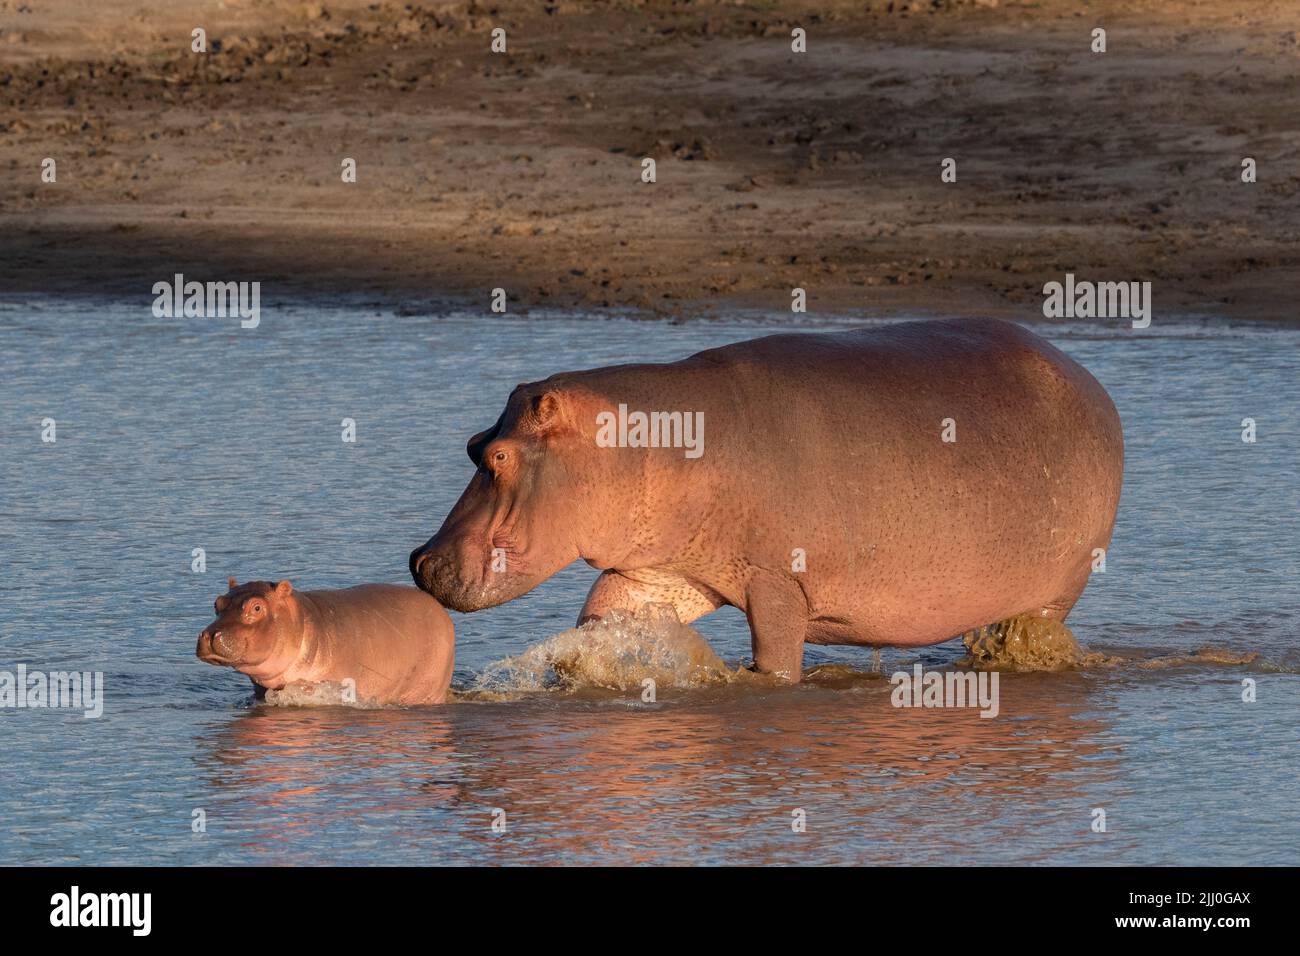 Zambia, South Luangwa National Park. Hippopotomus mother and baby in river (WILD: Hippopotamus amphibius) Stock Photo